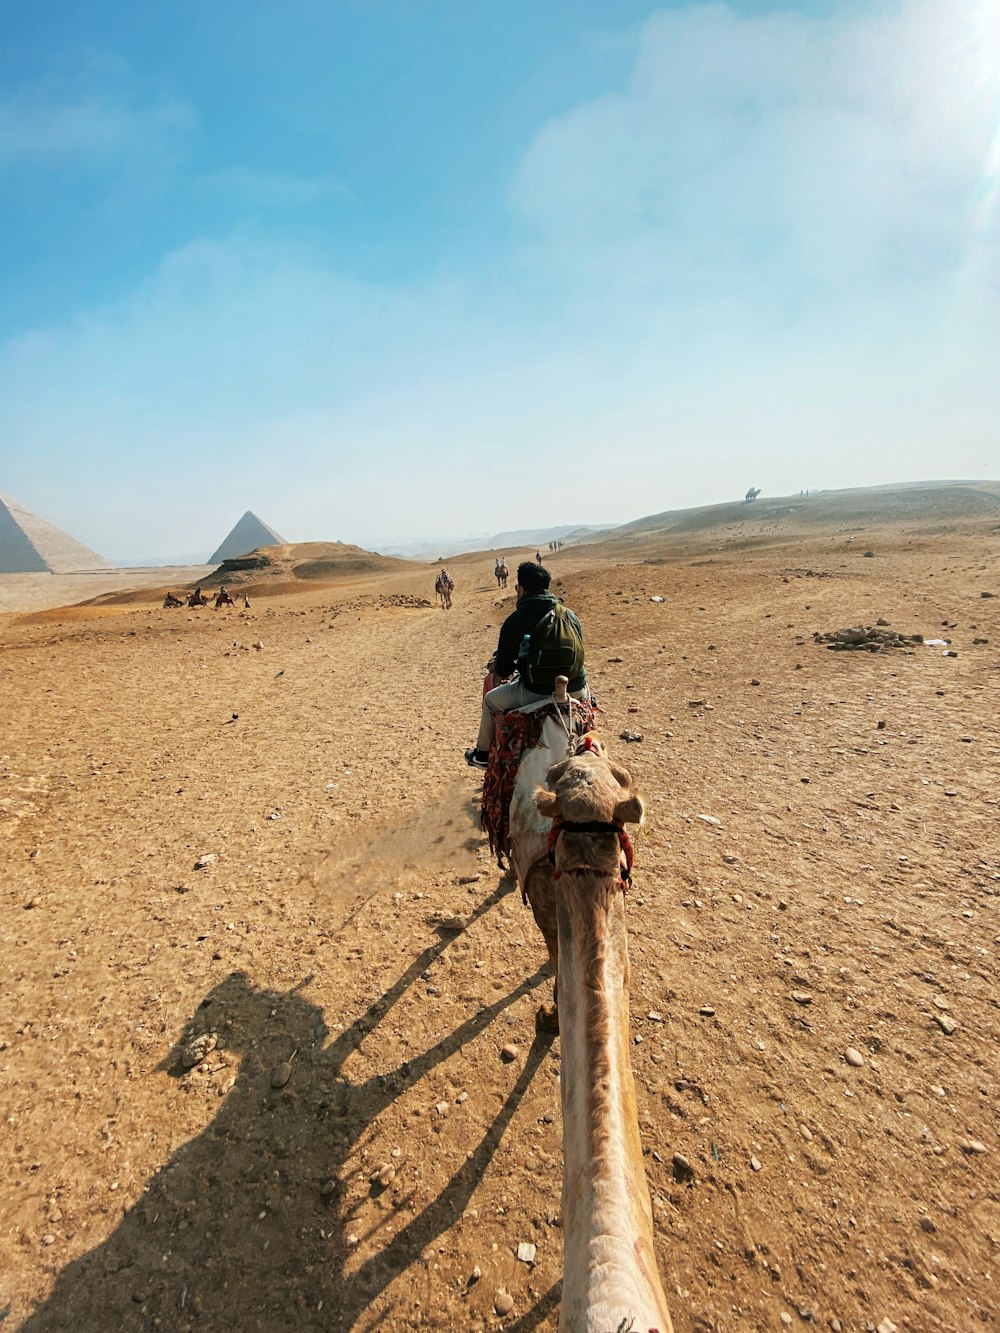 a person riding a camel in the desert